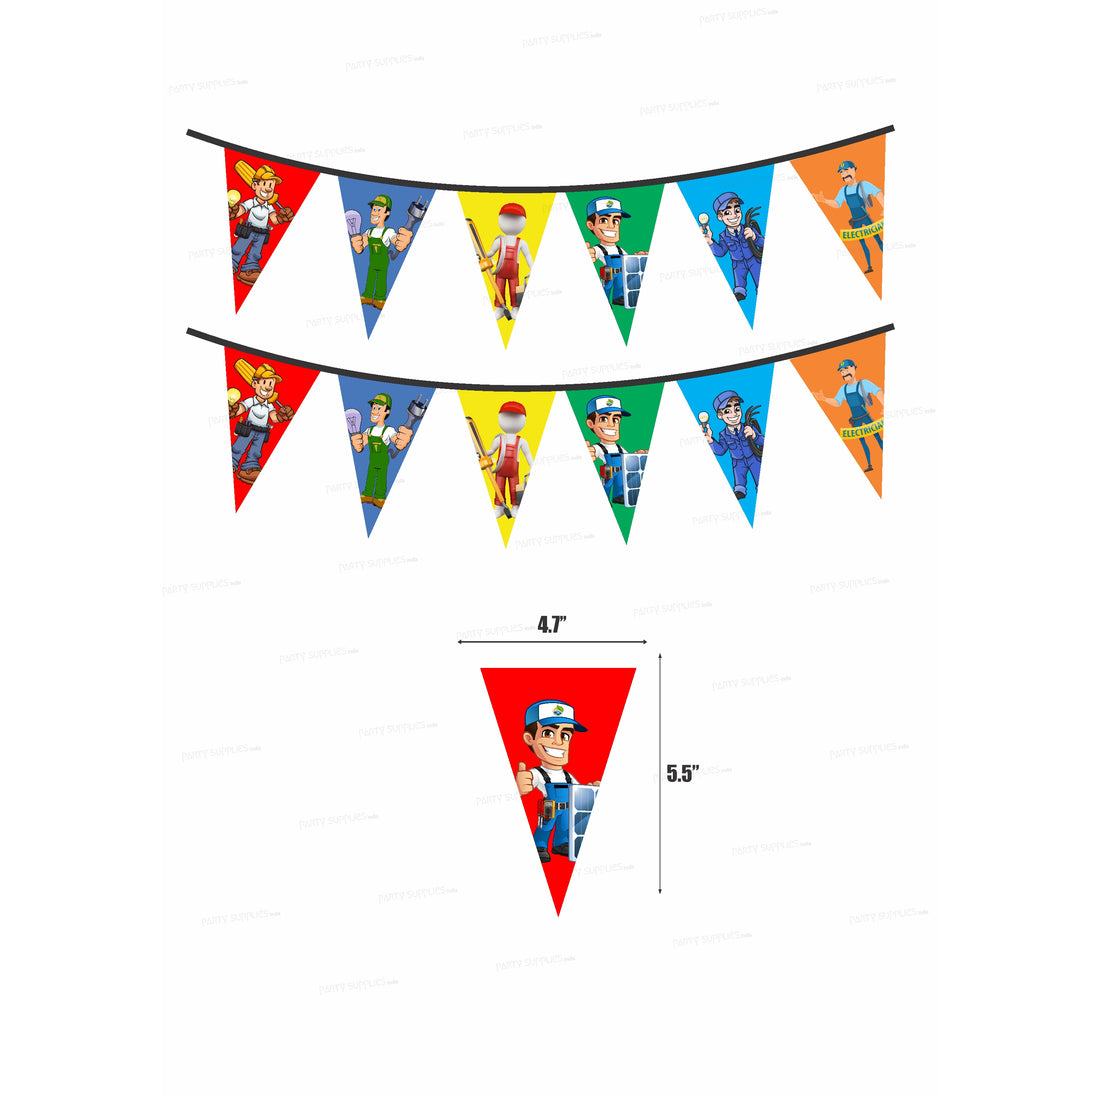 PSI Electrician  Theme Flag Bunting